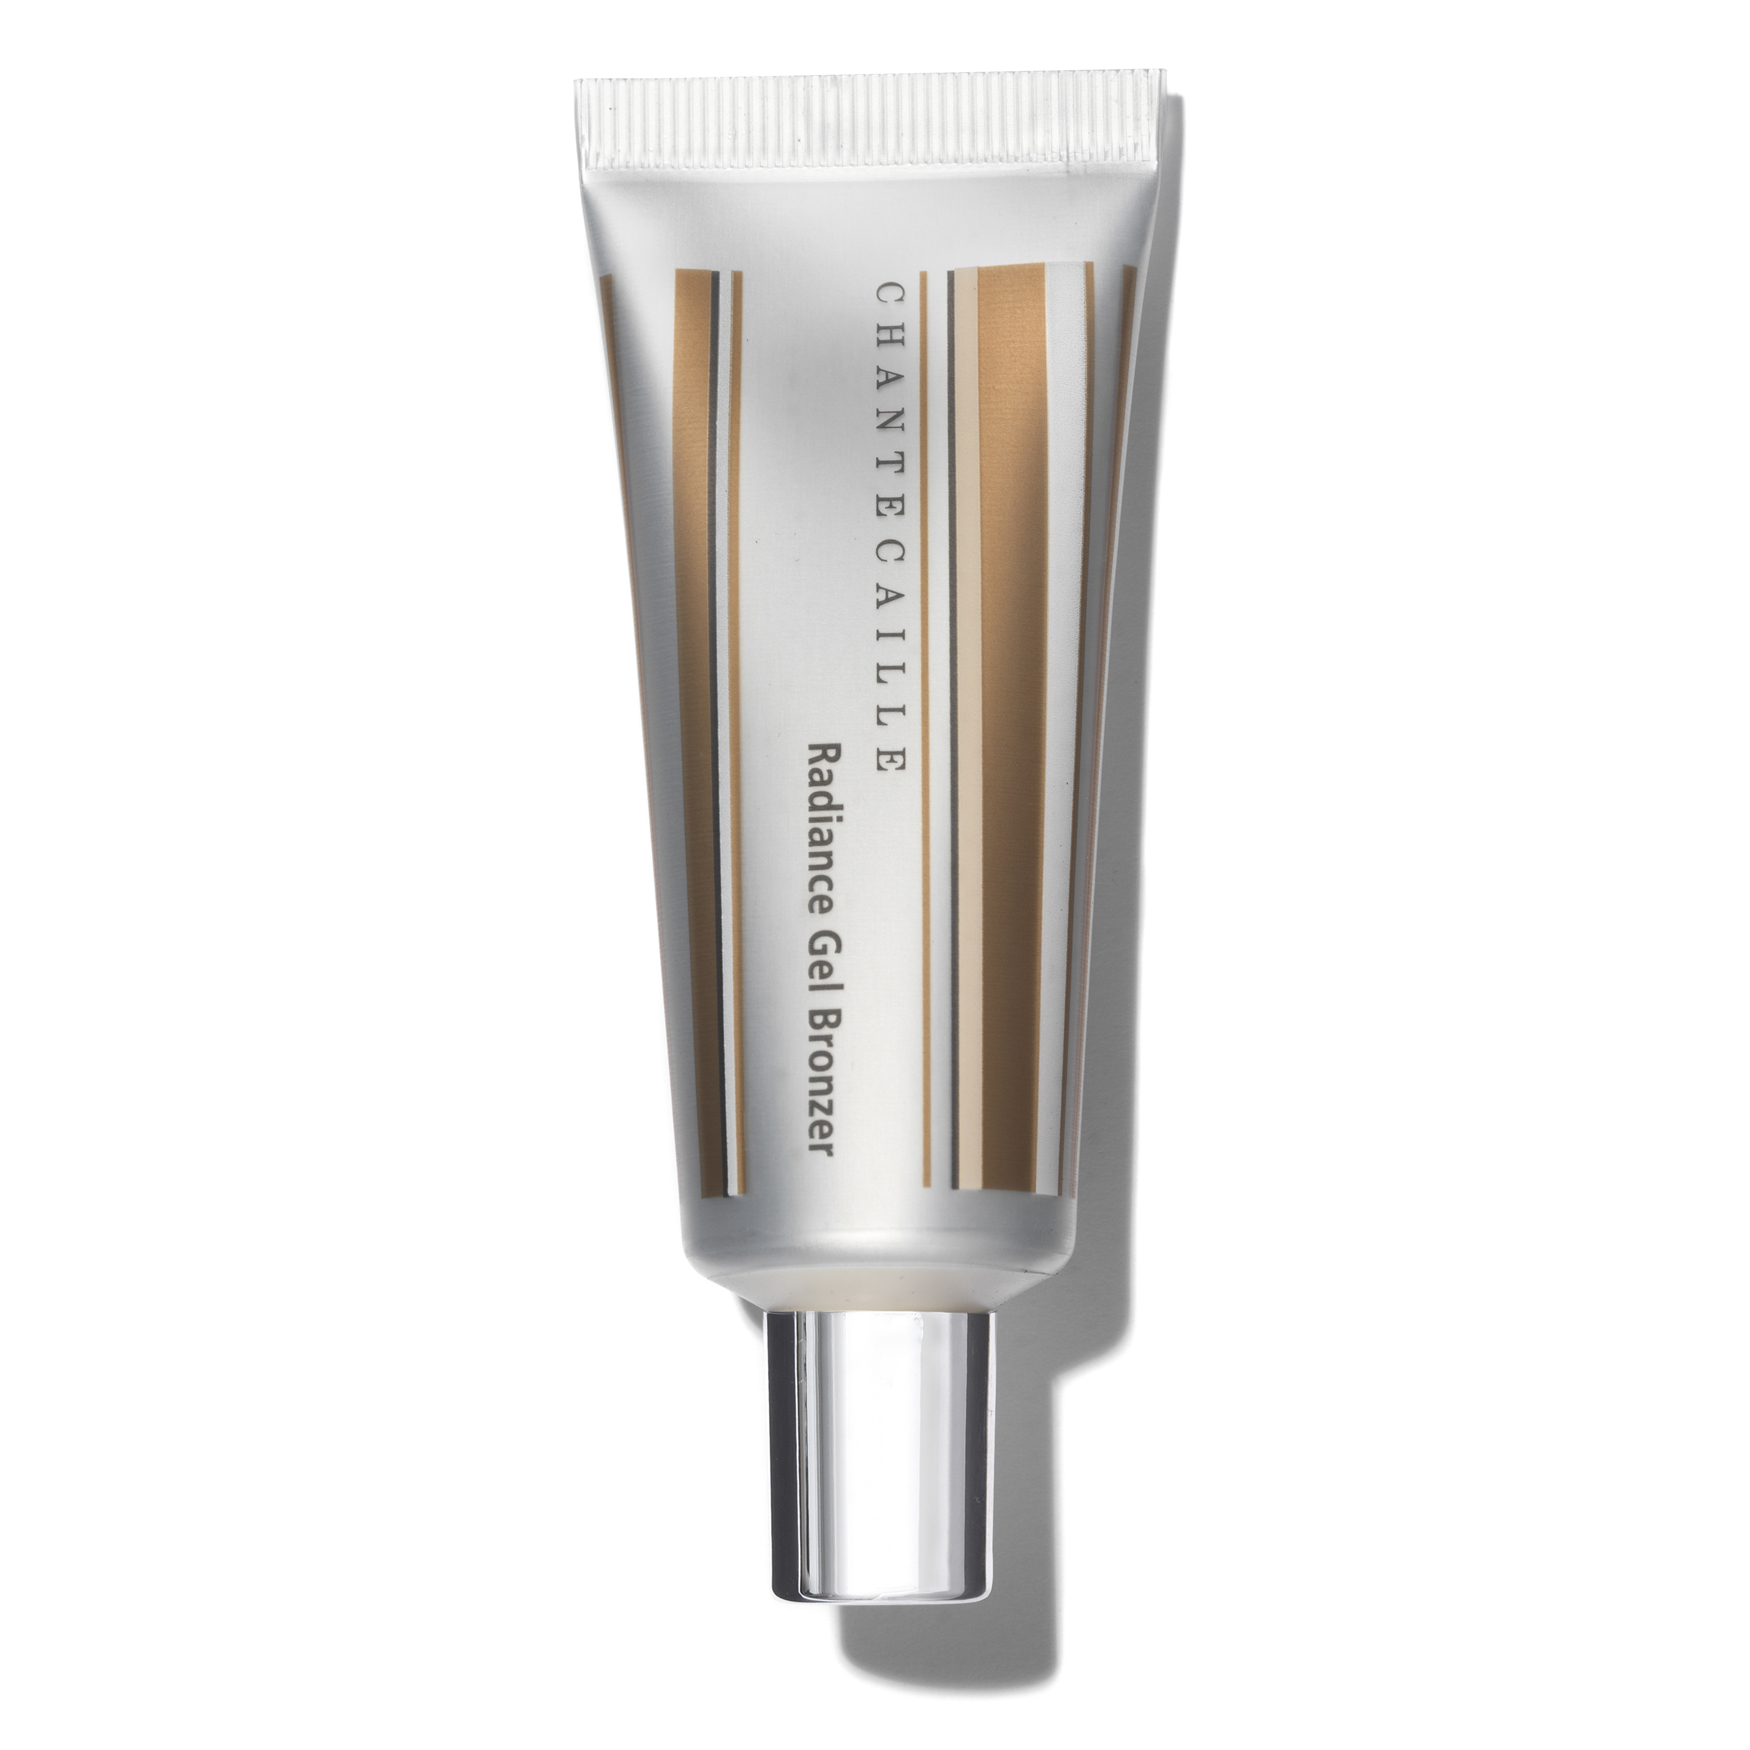 Chantecaille Radiance Gel Bronzer Travel Size | Space NK